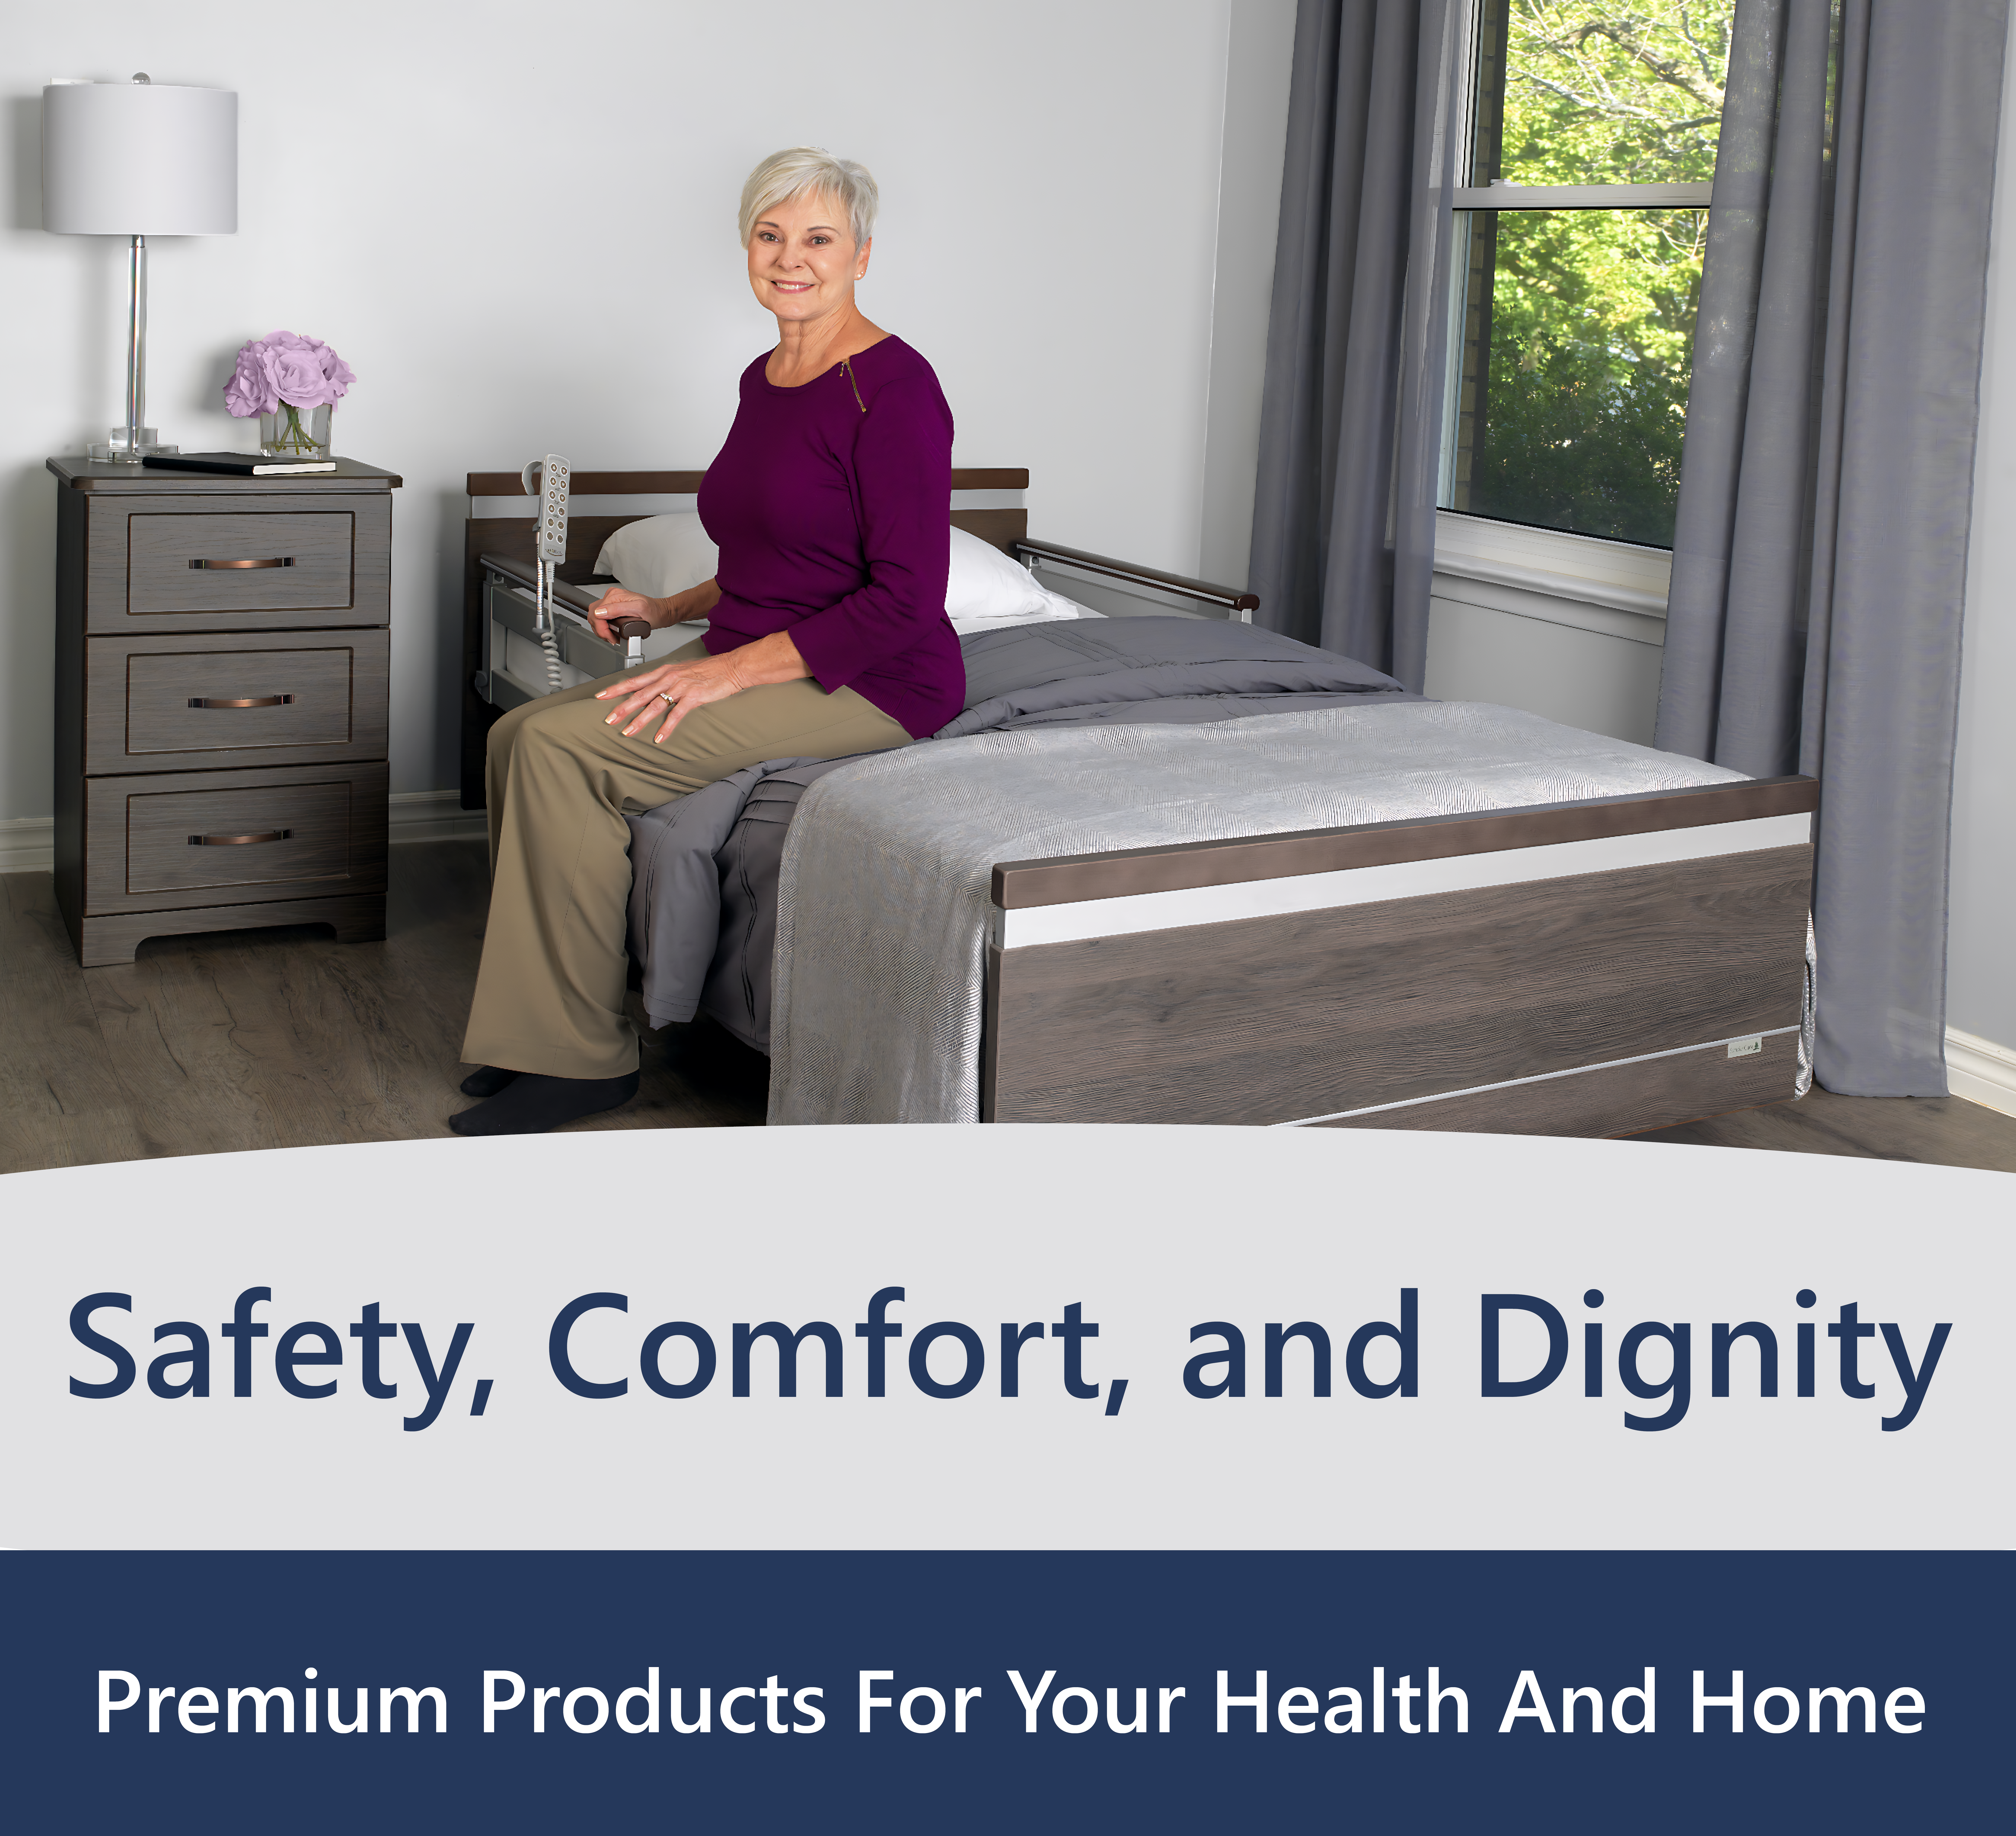 Safety and comfort premium products for your health and home.